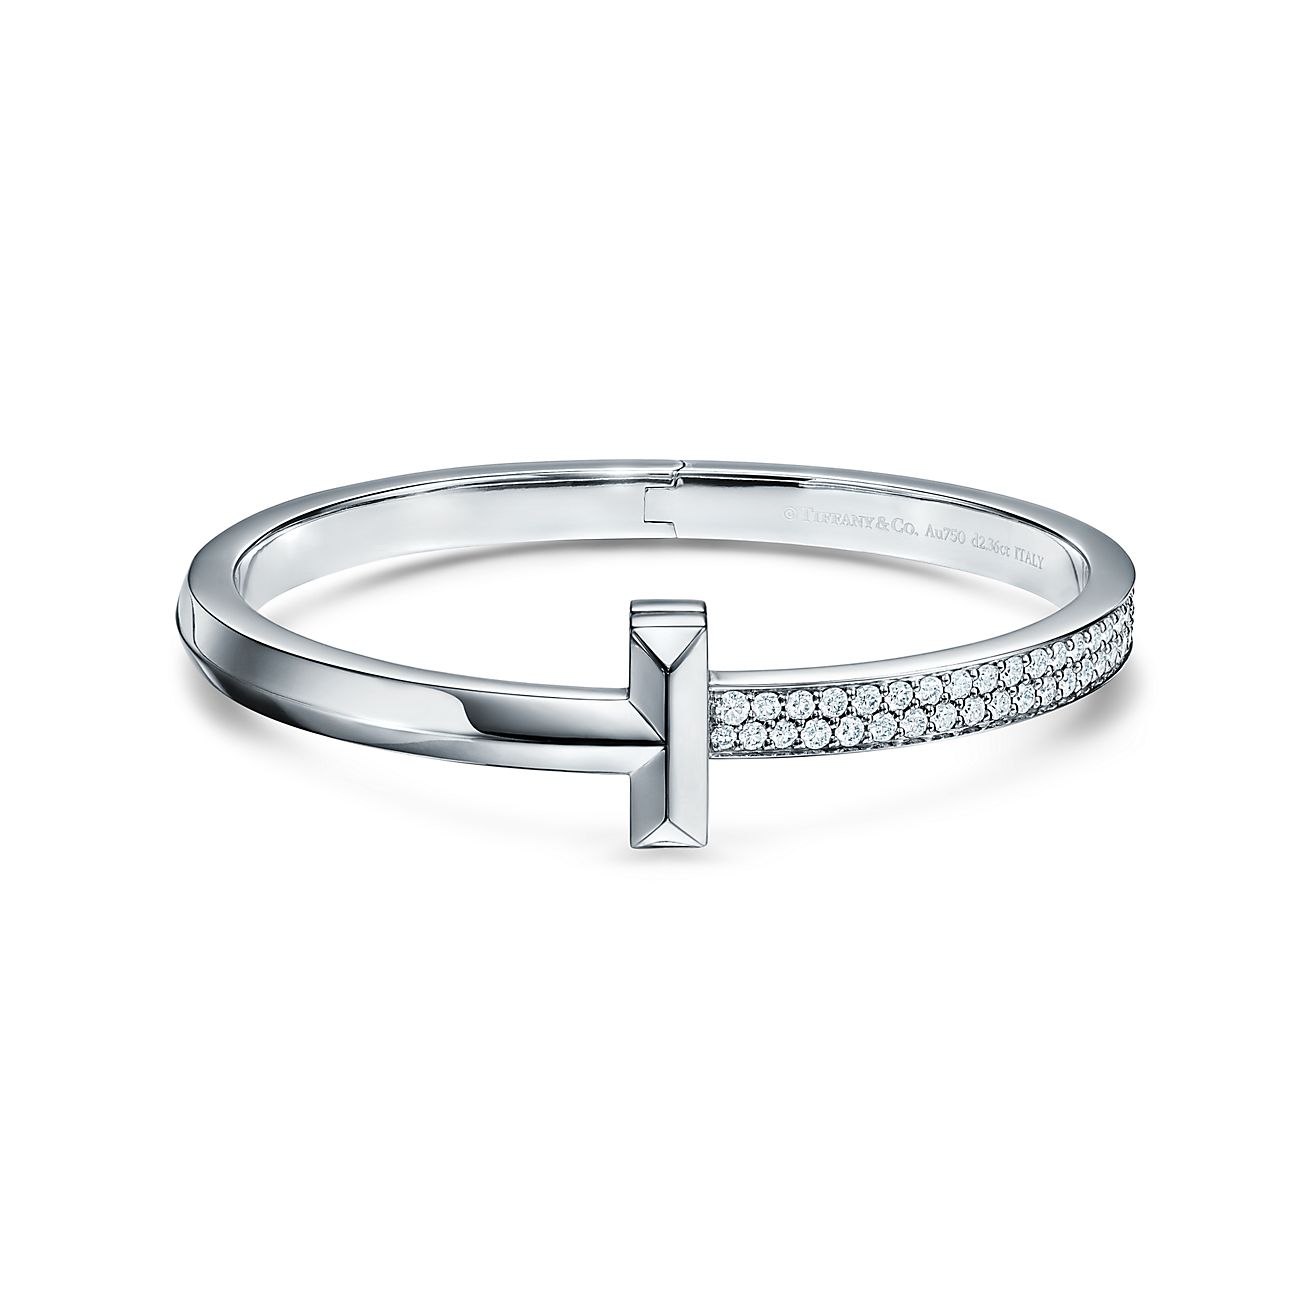 Tiffany T T1 wide diamond hinged bangle in 18k white gold, large ...